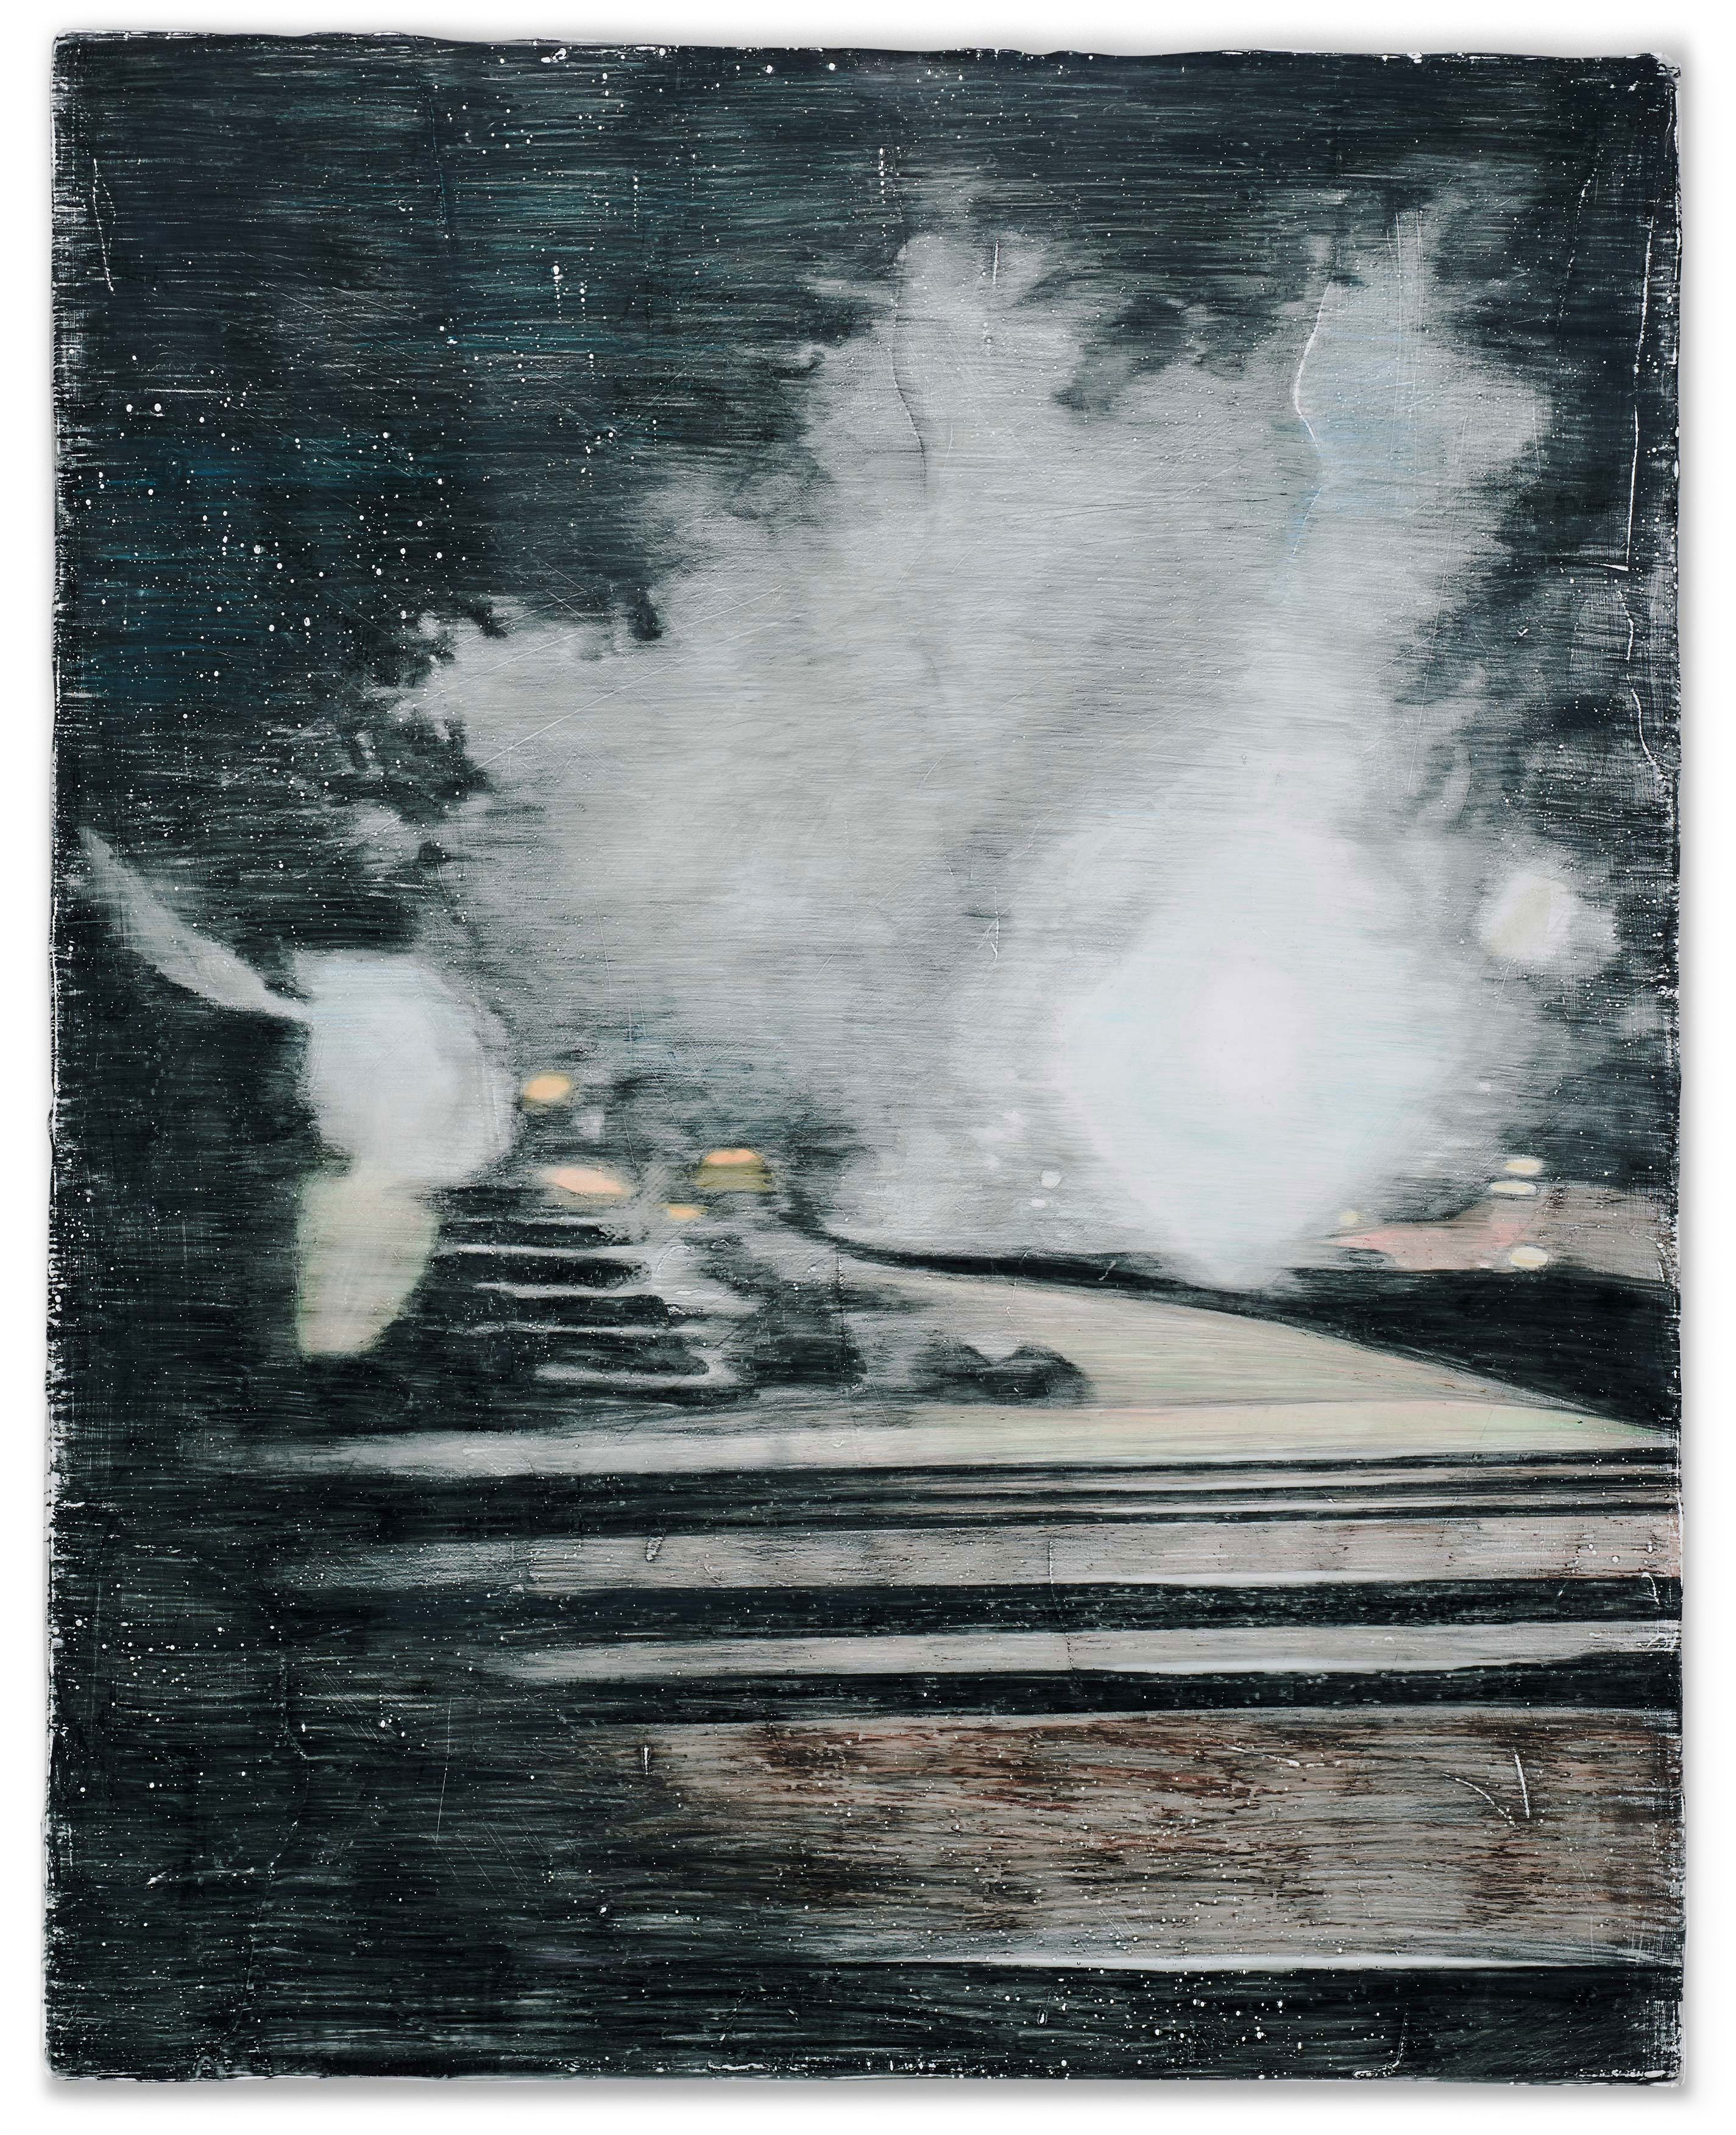 A semi-abstract colored pencil drawing by artist Caroline Coolidge that shows a dark landscape with horizontal lines in the foreground and a large bright cloud-like form in the top half of the drawing.